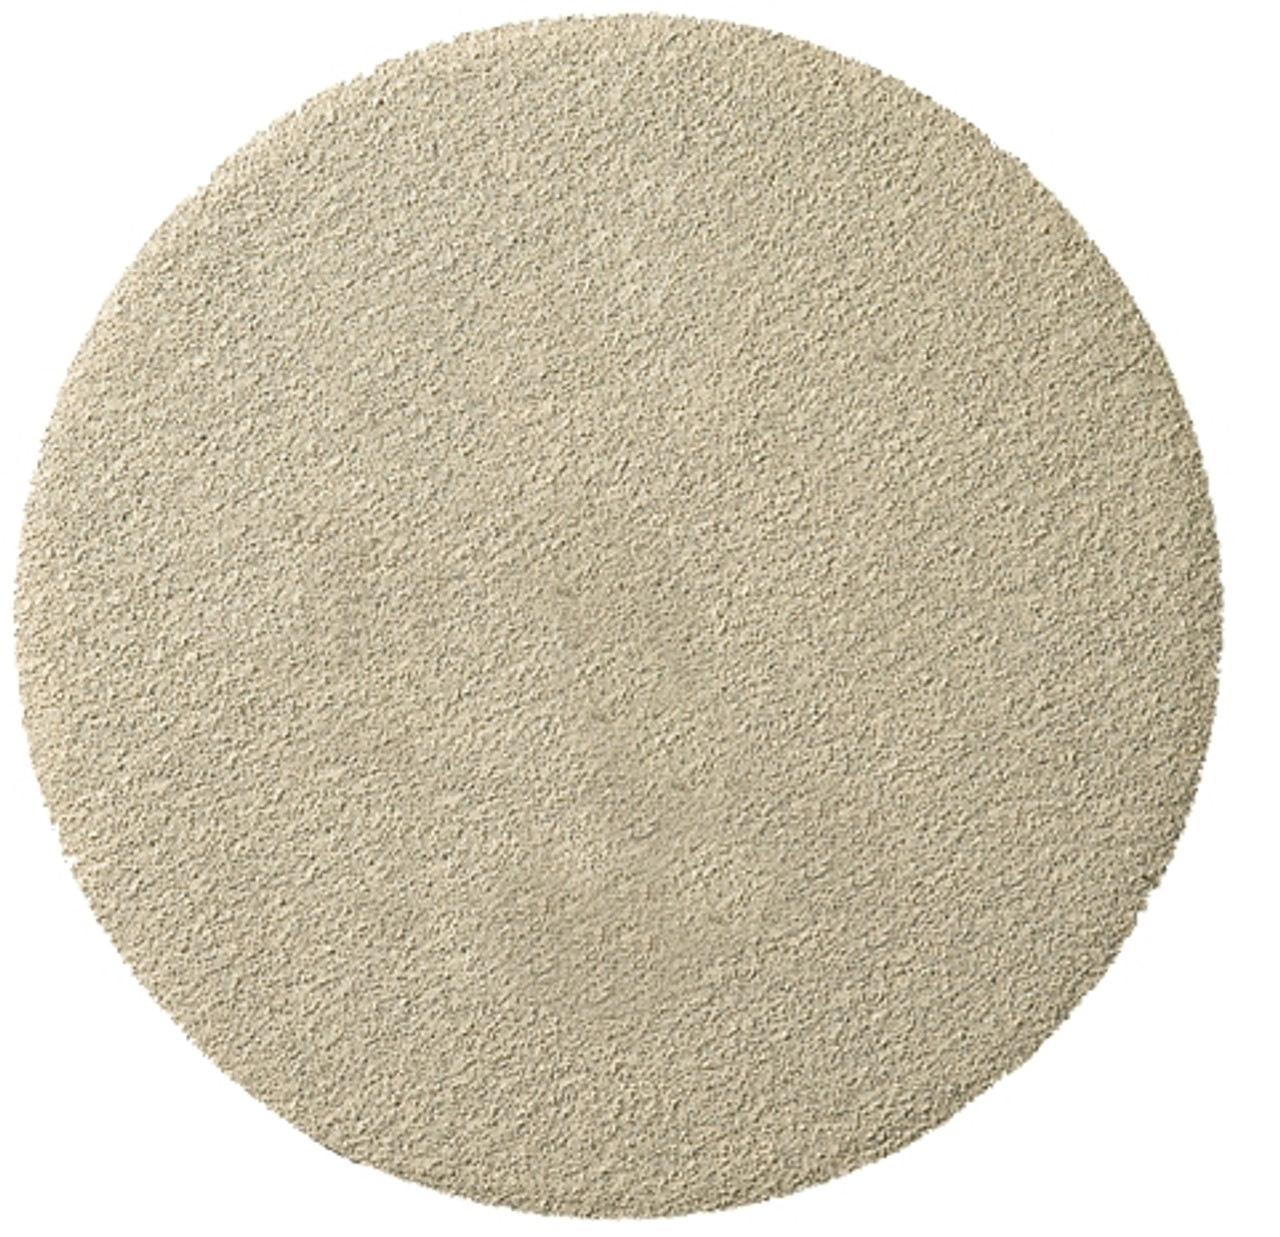 Self Fastening Disc - (Ps33) Paper/Aluminium Oxide/No Hole 180Grit 180Mm